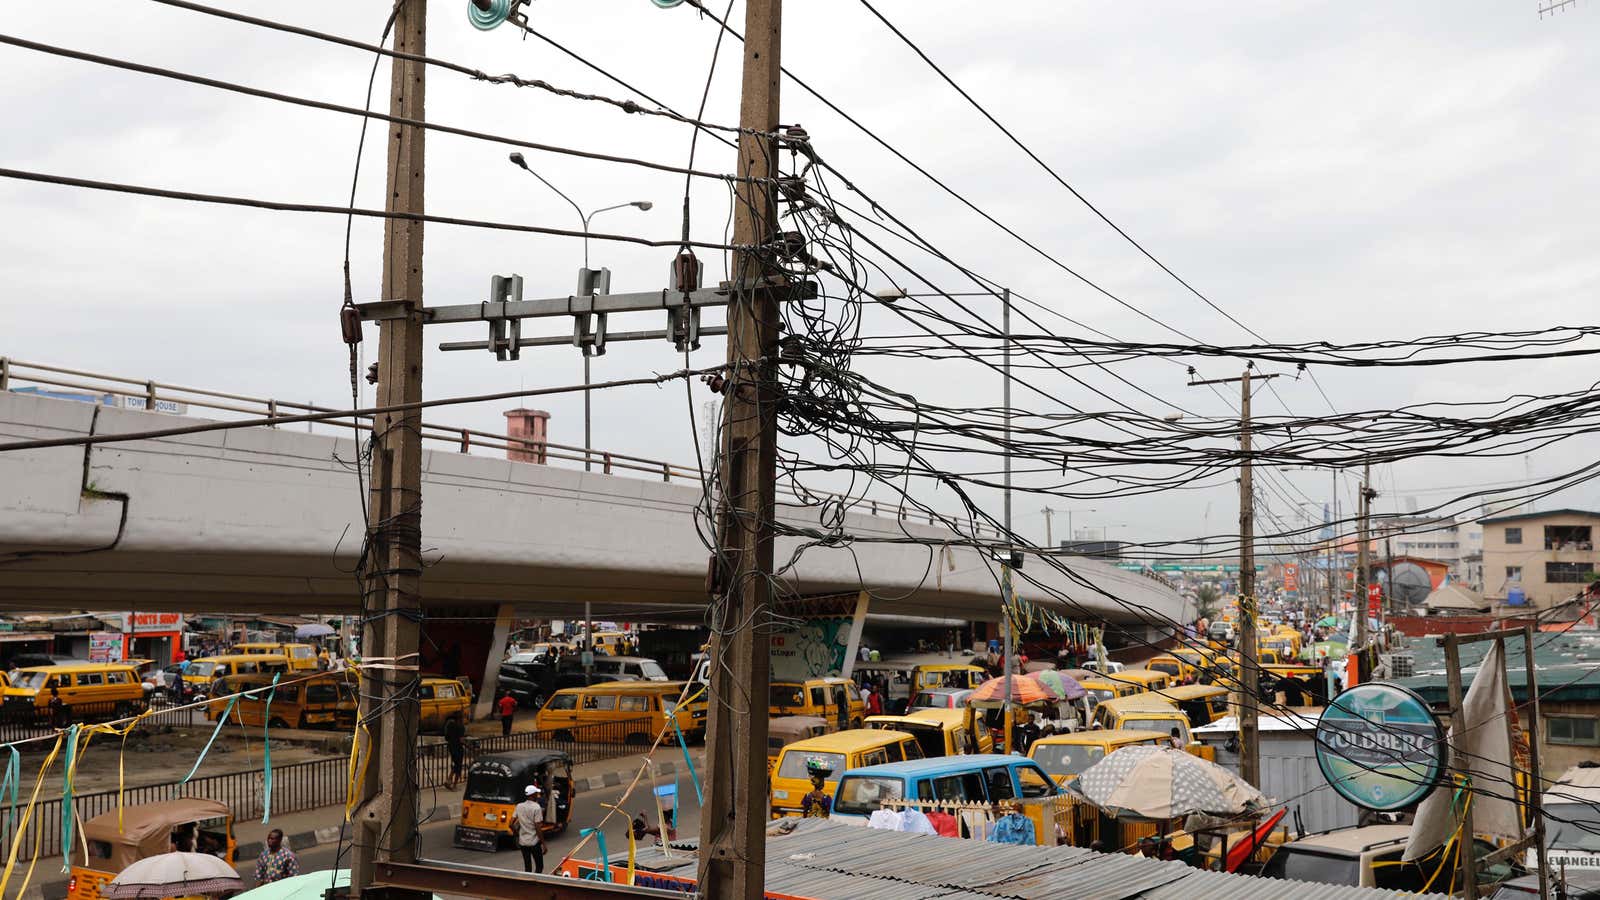 Plenty of electric wires, but not plenty of electricity in Lagos